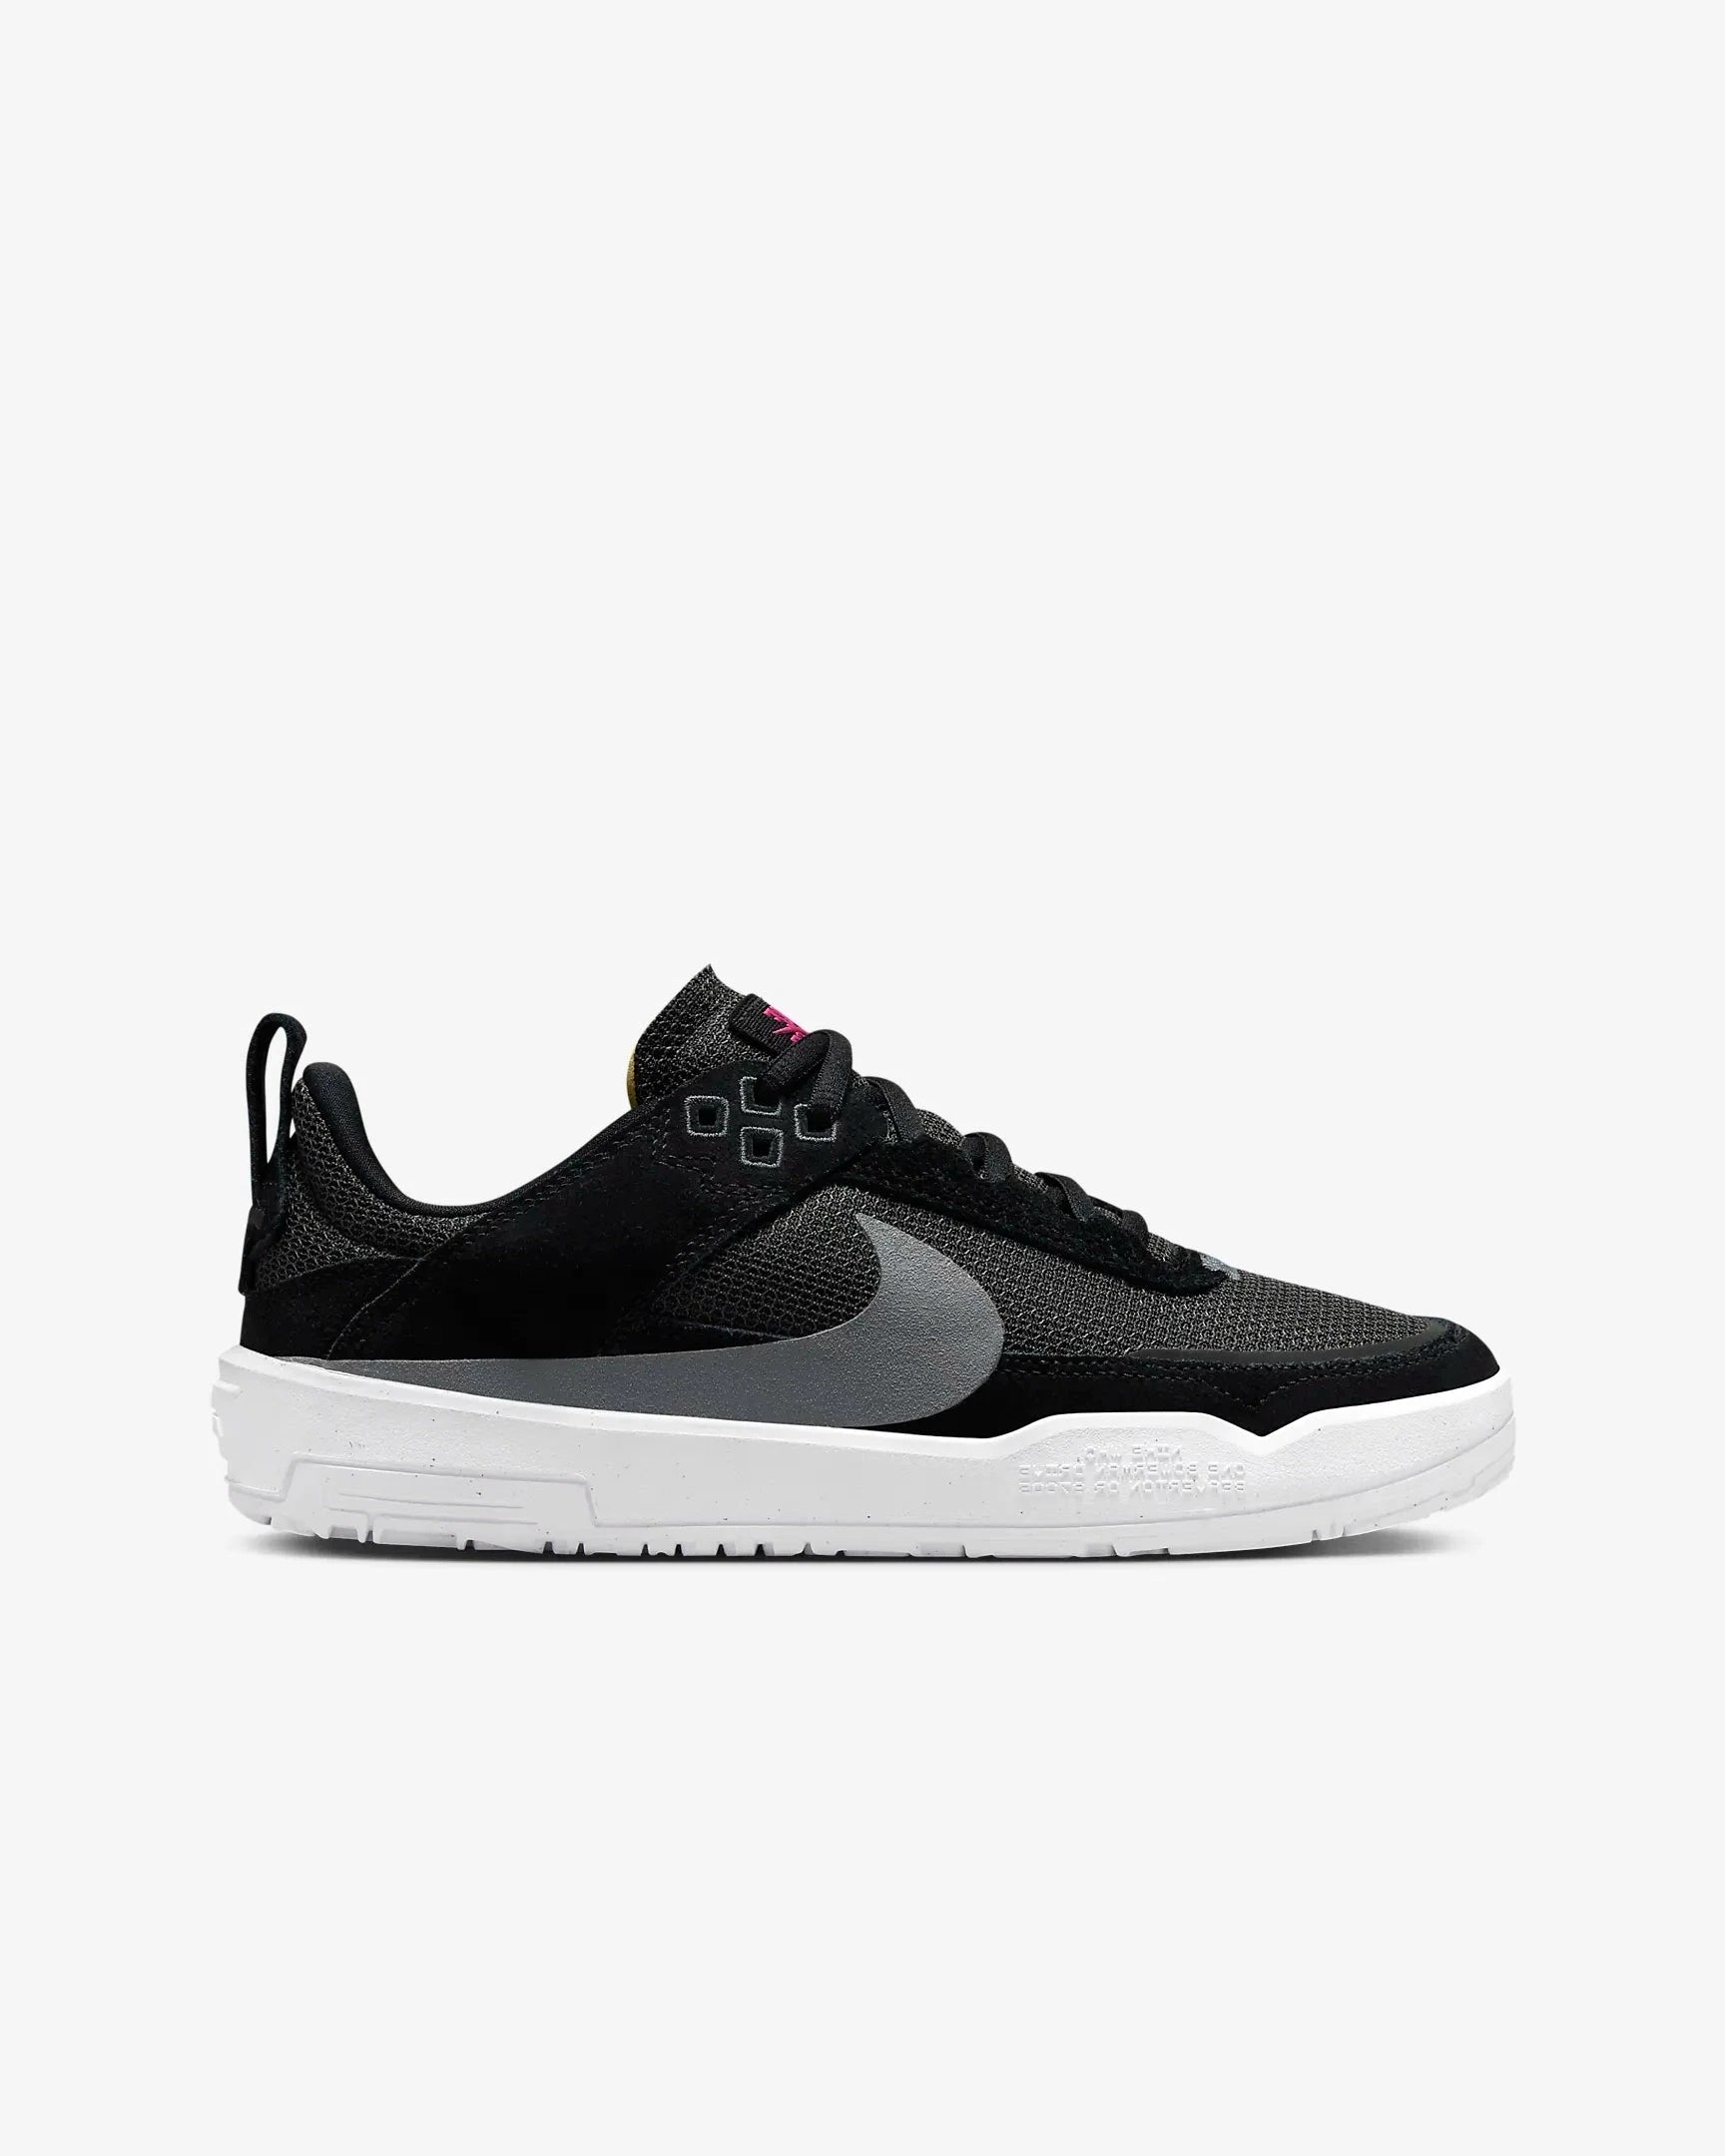 Nike SB Day One GS Shoes - (Black/Anthracite/Alchemy Pink/Cool Grey)